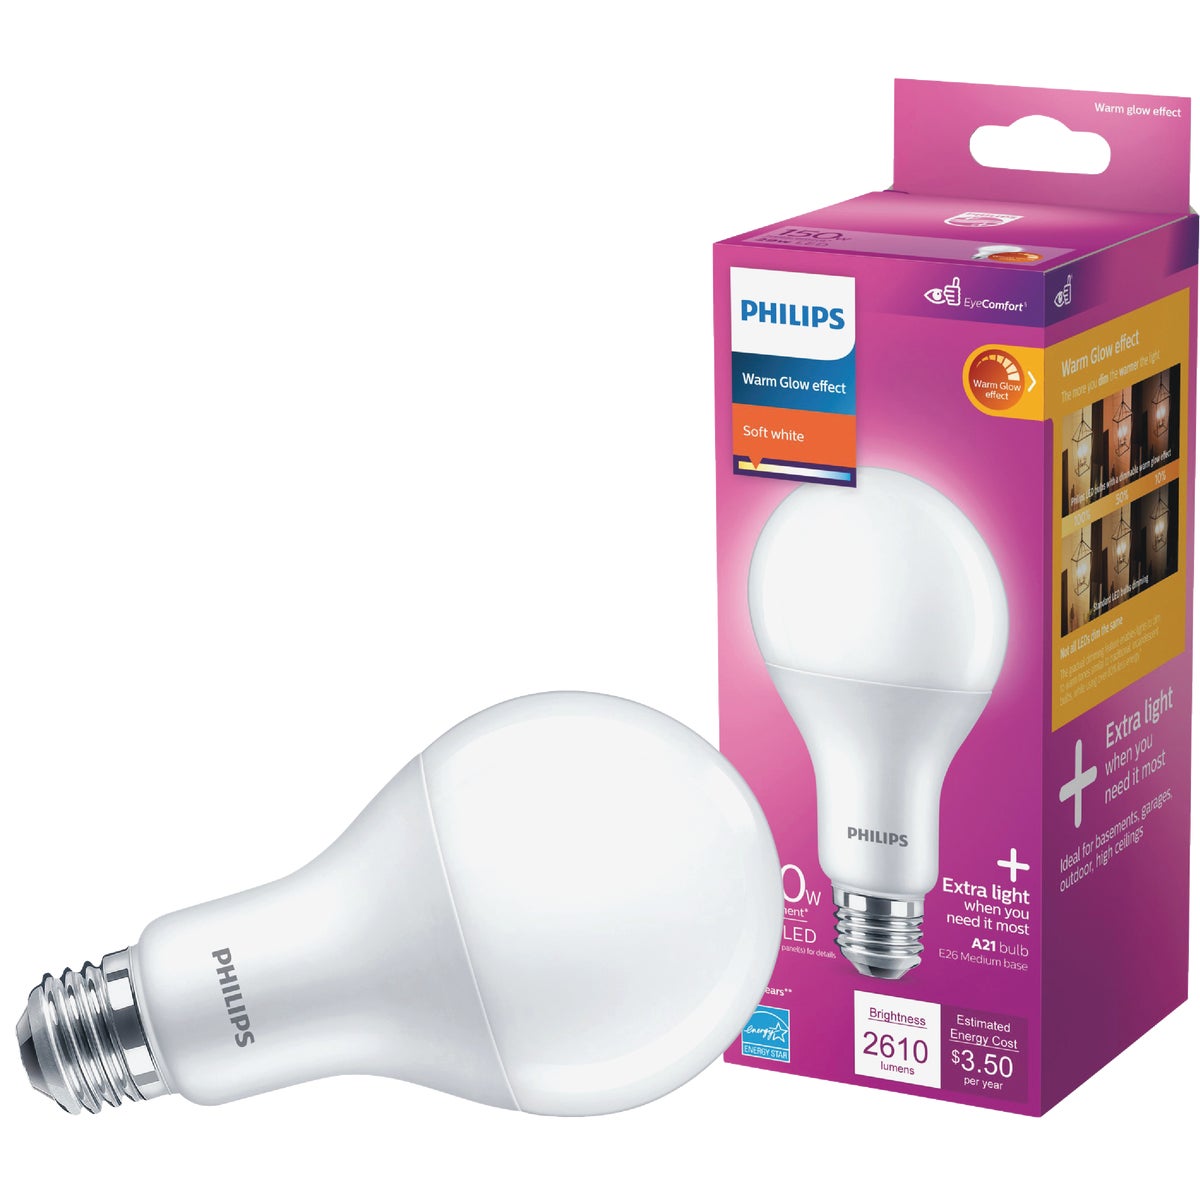 Philips Warm Glow 150W Equivalent Soft White A21 Medium Dimmable LED Light Bulb